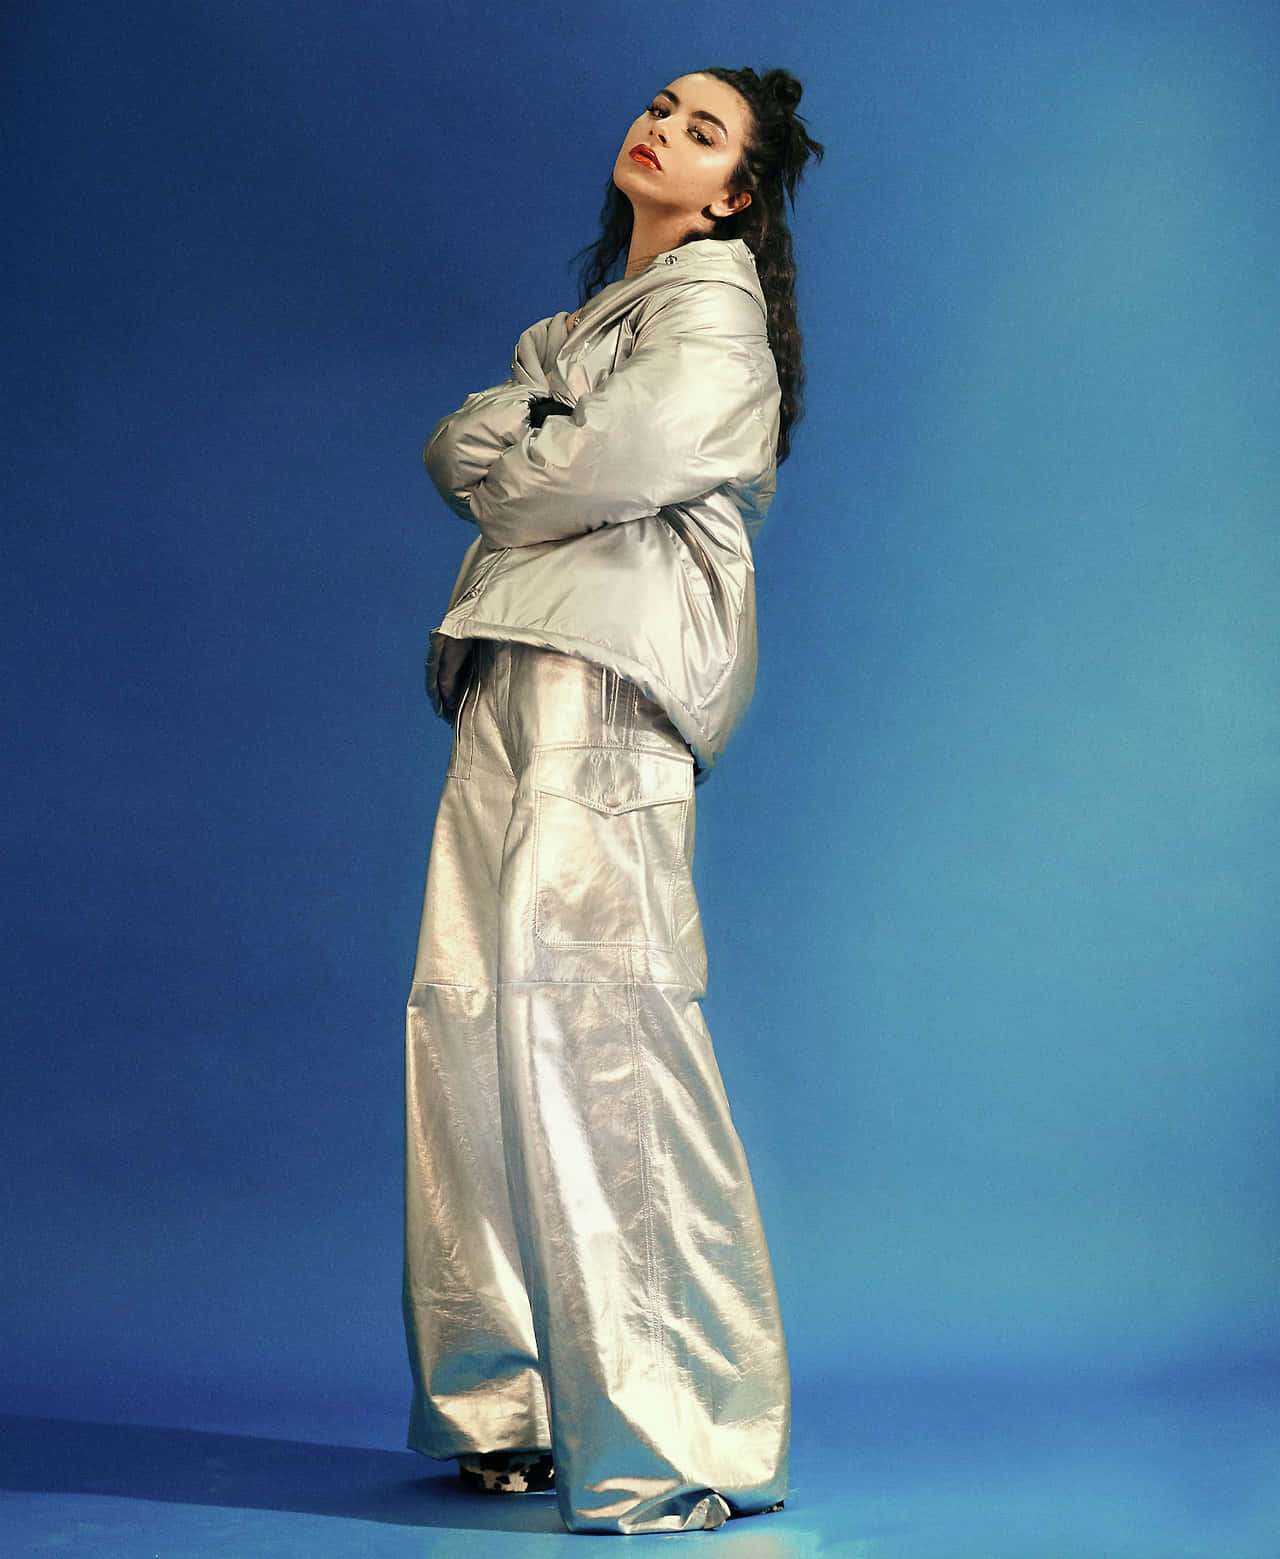 A Woman In A Silver Jacket And Pants